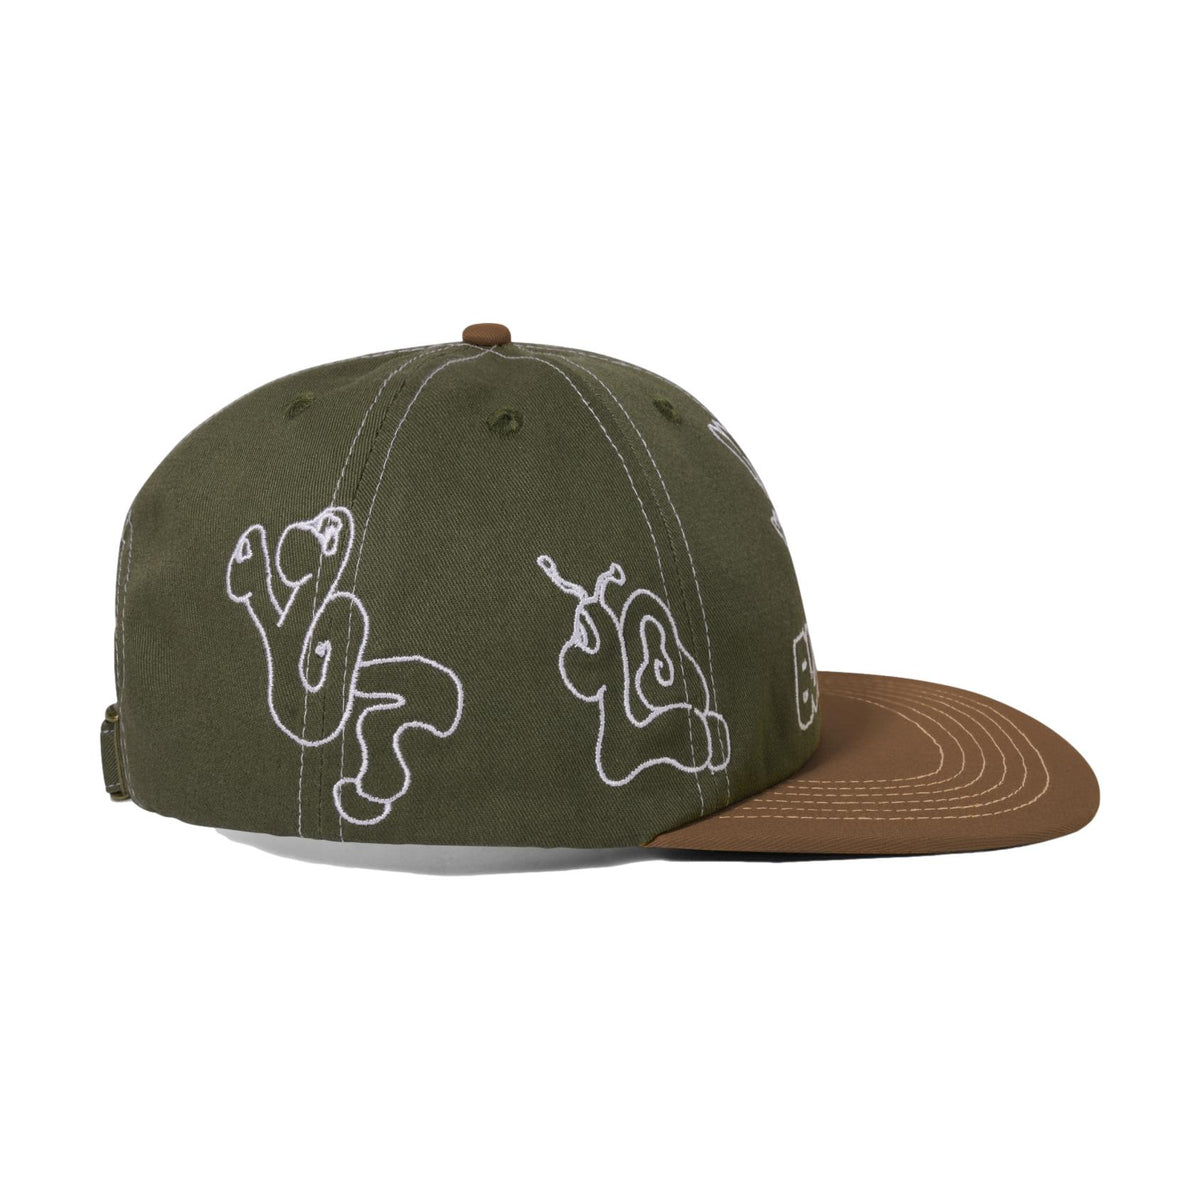 Butter Critter 6 Panel Cap Army/Brown - Venue Skateboards